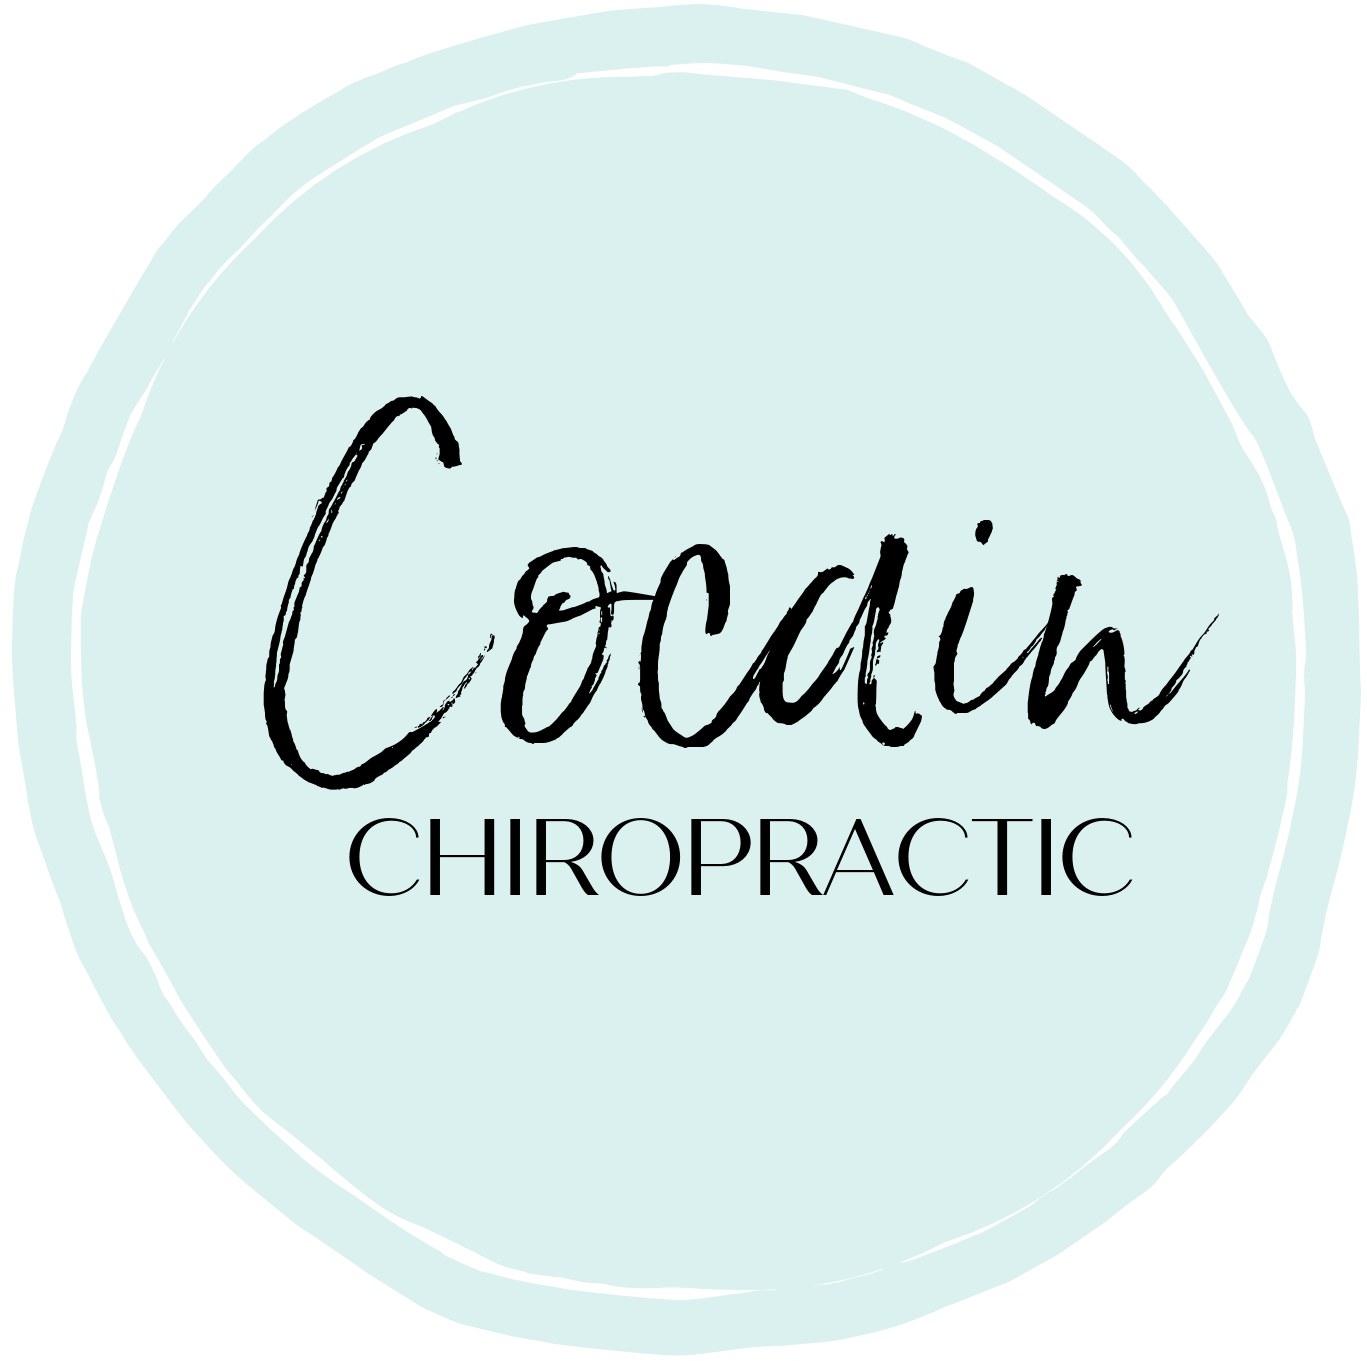 Dr. Cocain, Cocain Chiropractic, College Chiropractic Group in Ventura -  Cocain Chiropractic